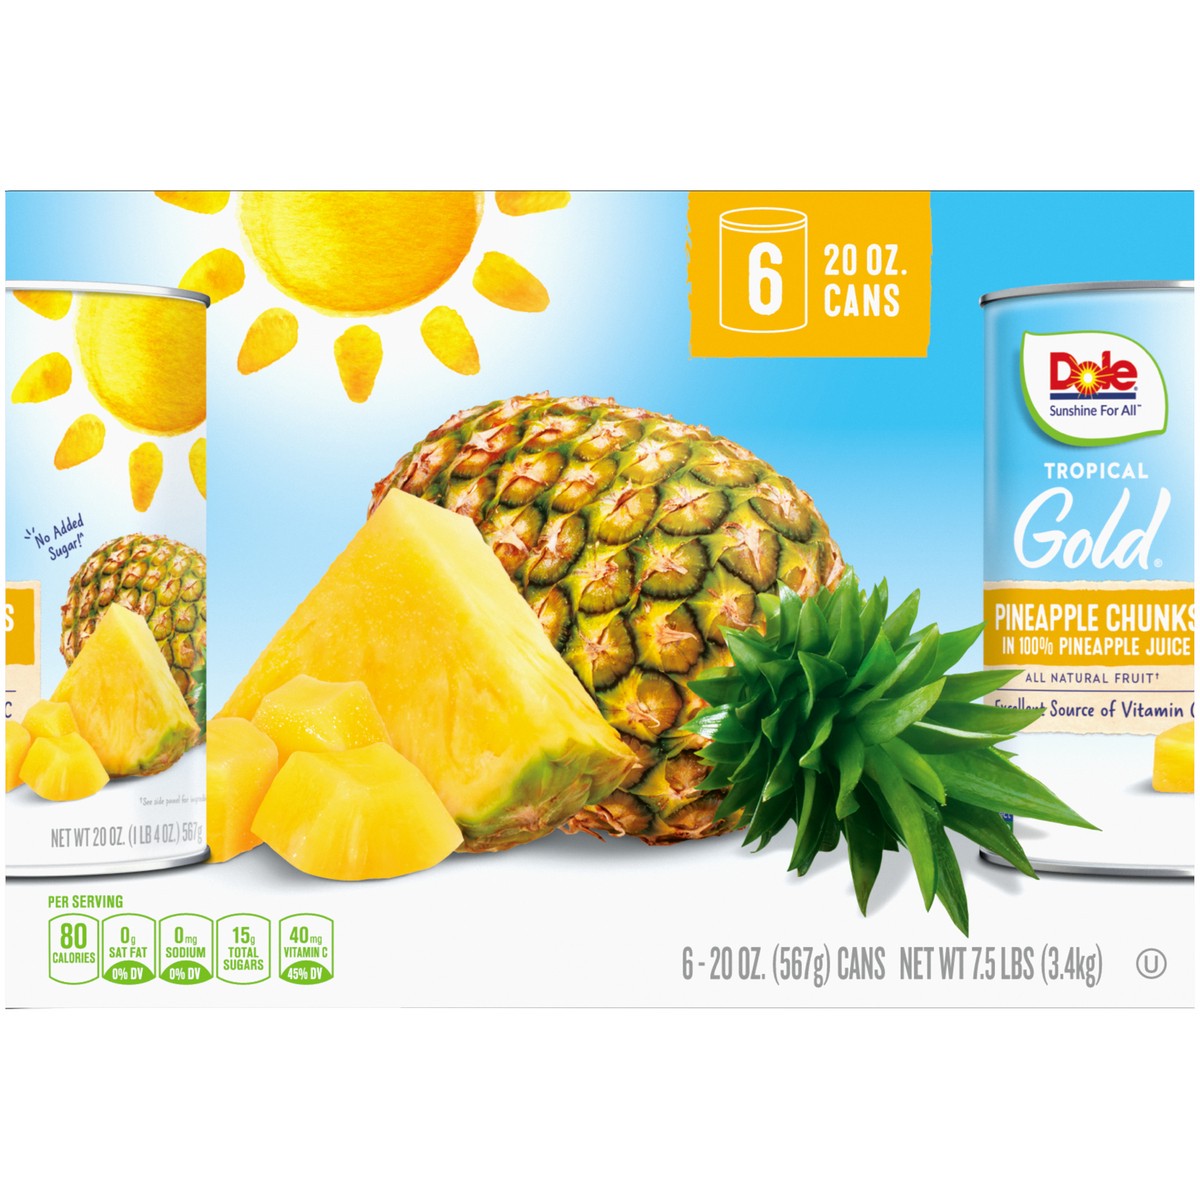 slide 8 of 9, Dole Tropical Gold Pineapple Chunks in 100% Pineapple Juice 6-20 oz. Cans, 7.5 lb